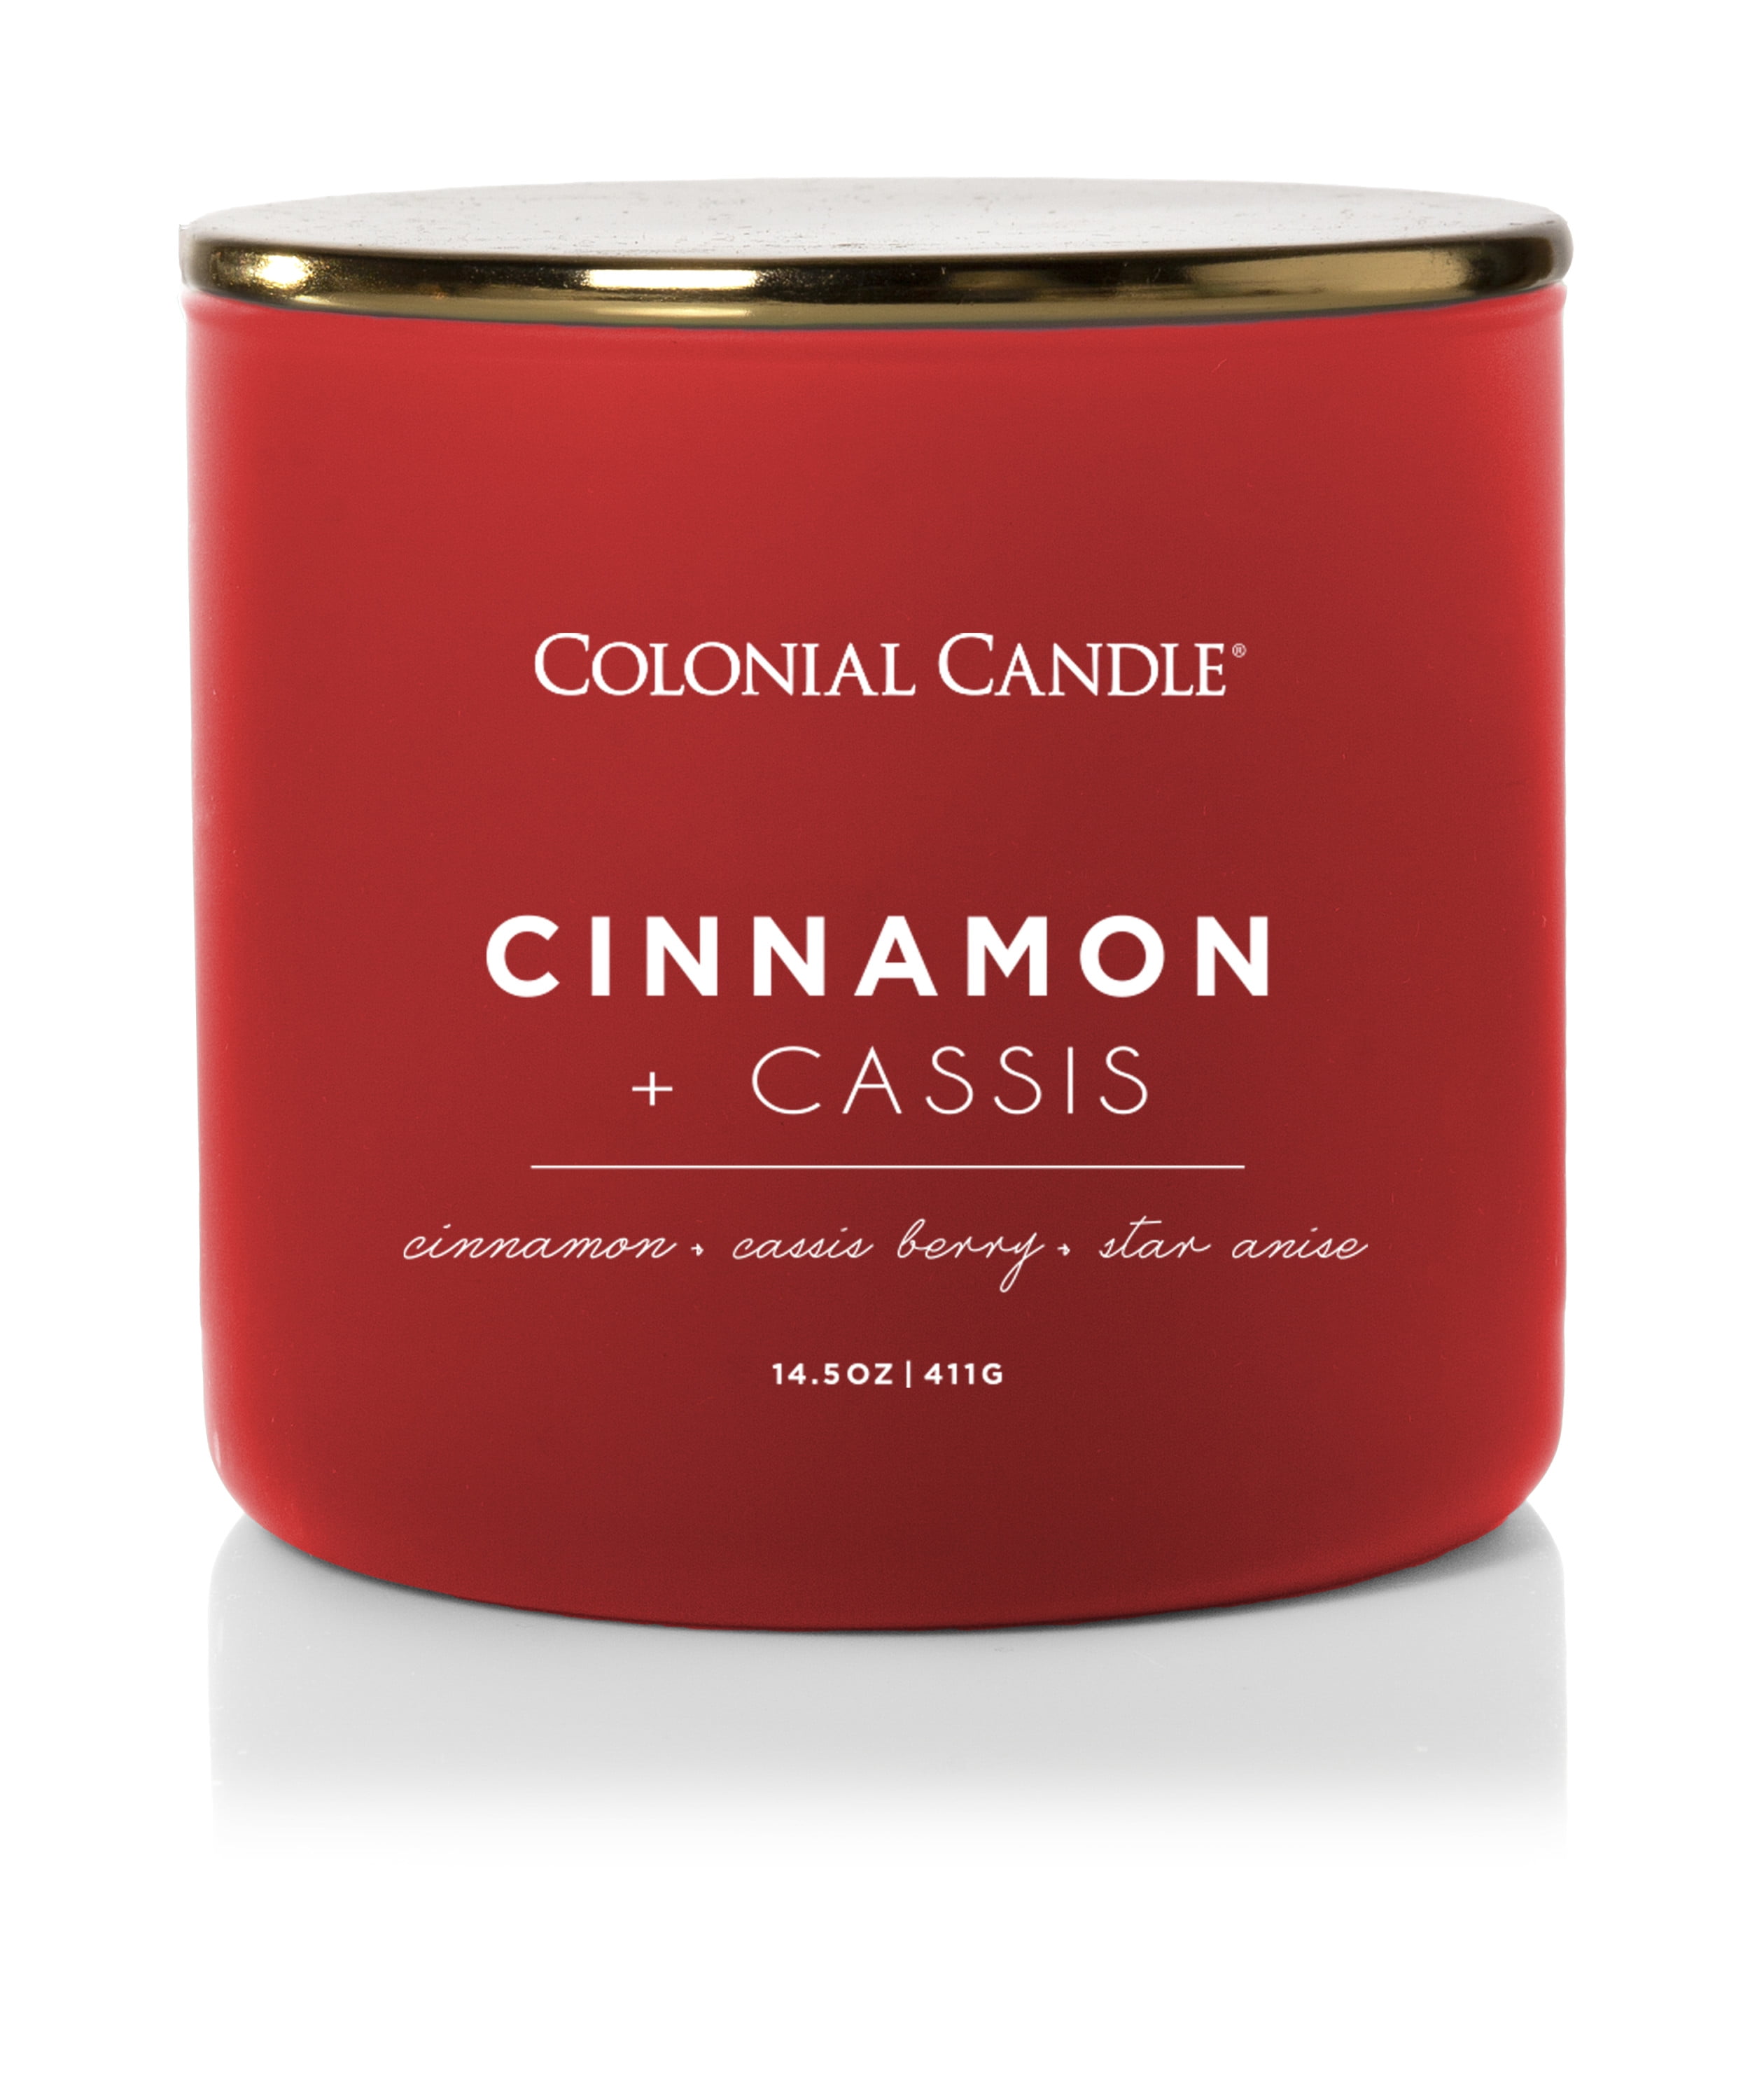 Room Fragrance warm and spicy Cinnamon Prices Candle Tin Delicious 